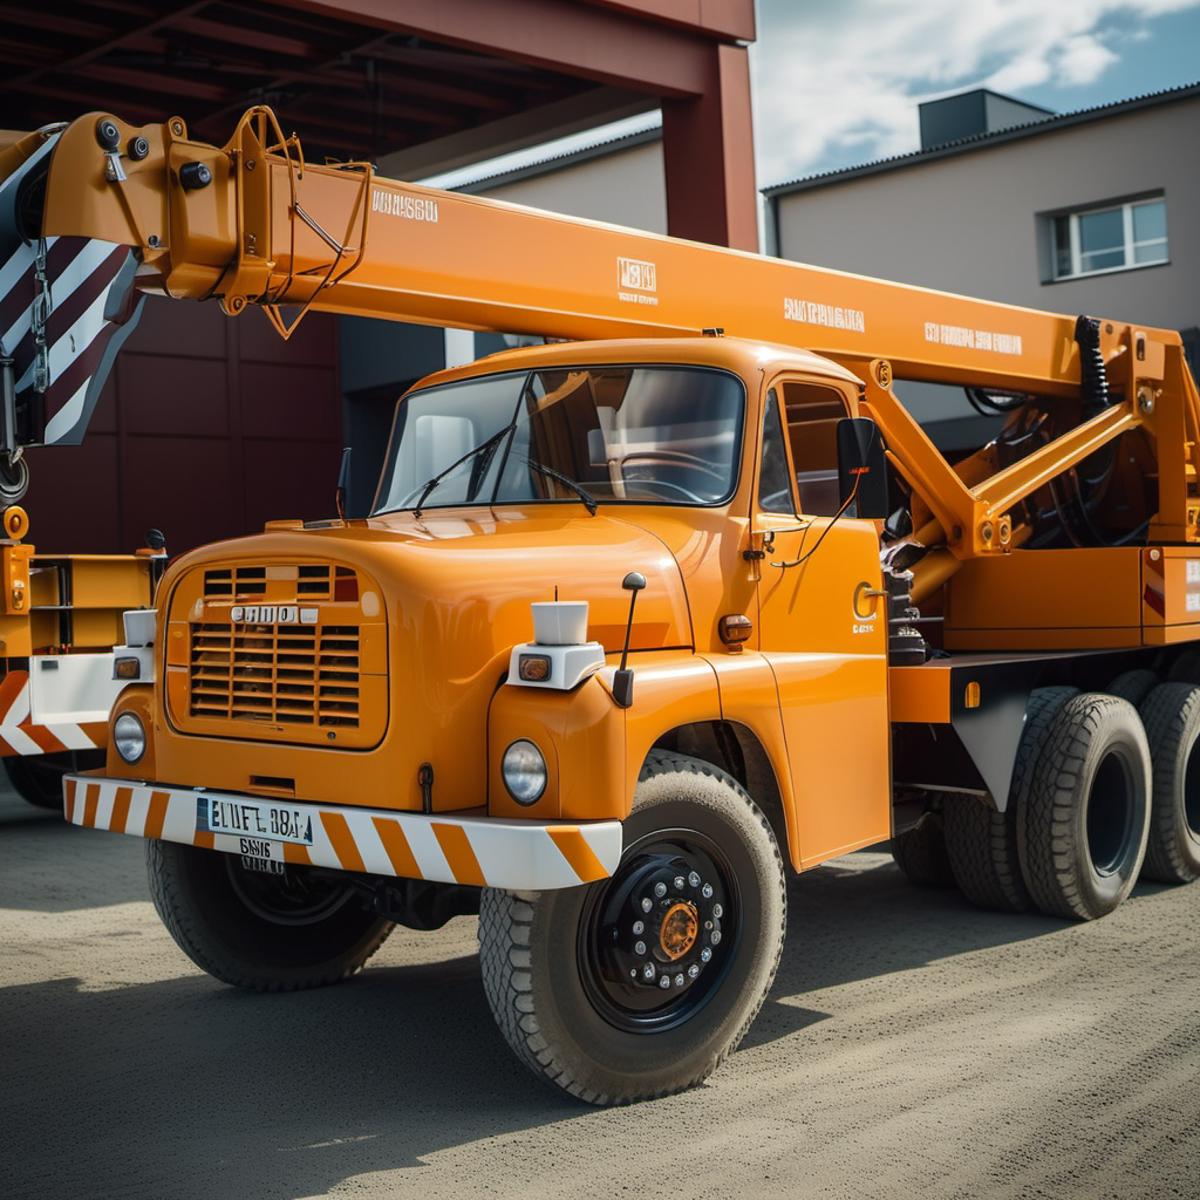 Tatra 148 Truck (1972-1982) LoHA image by airesearch